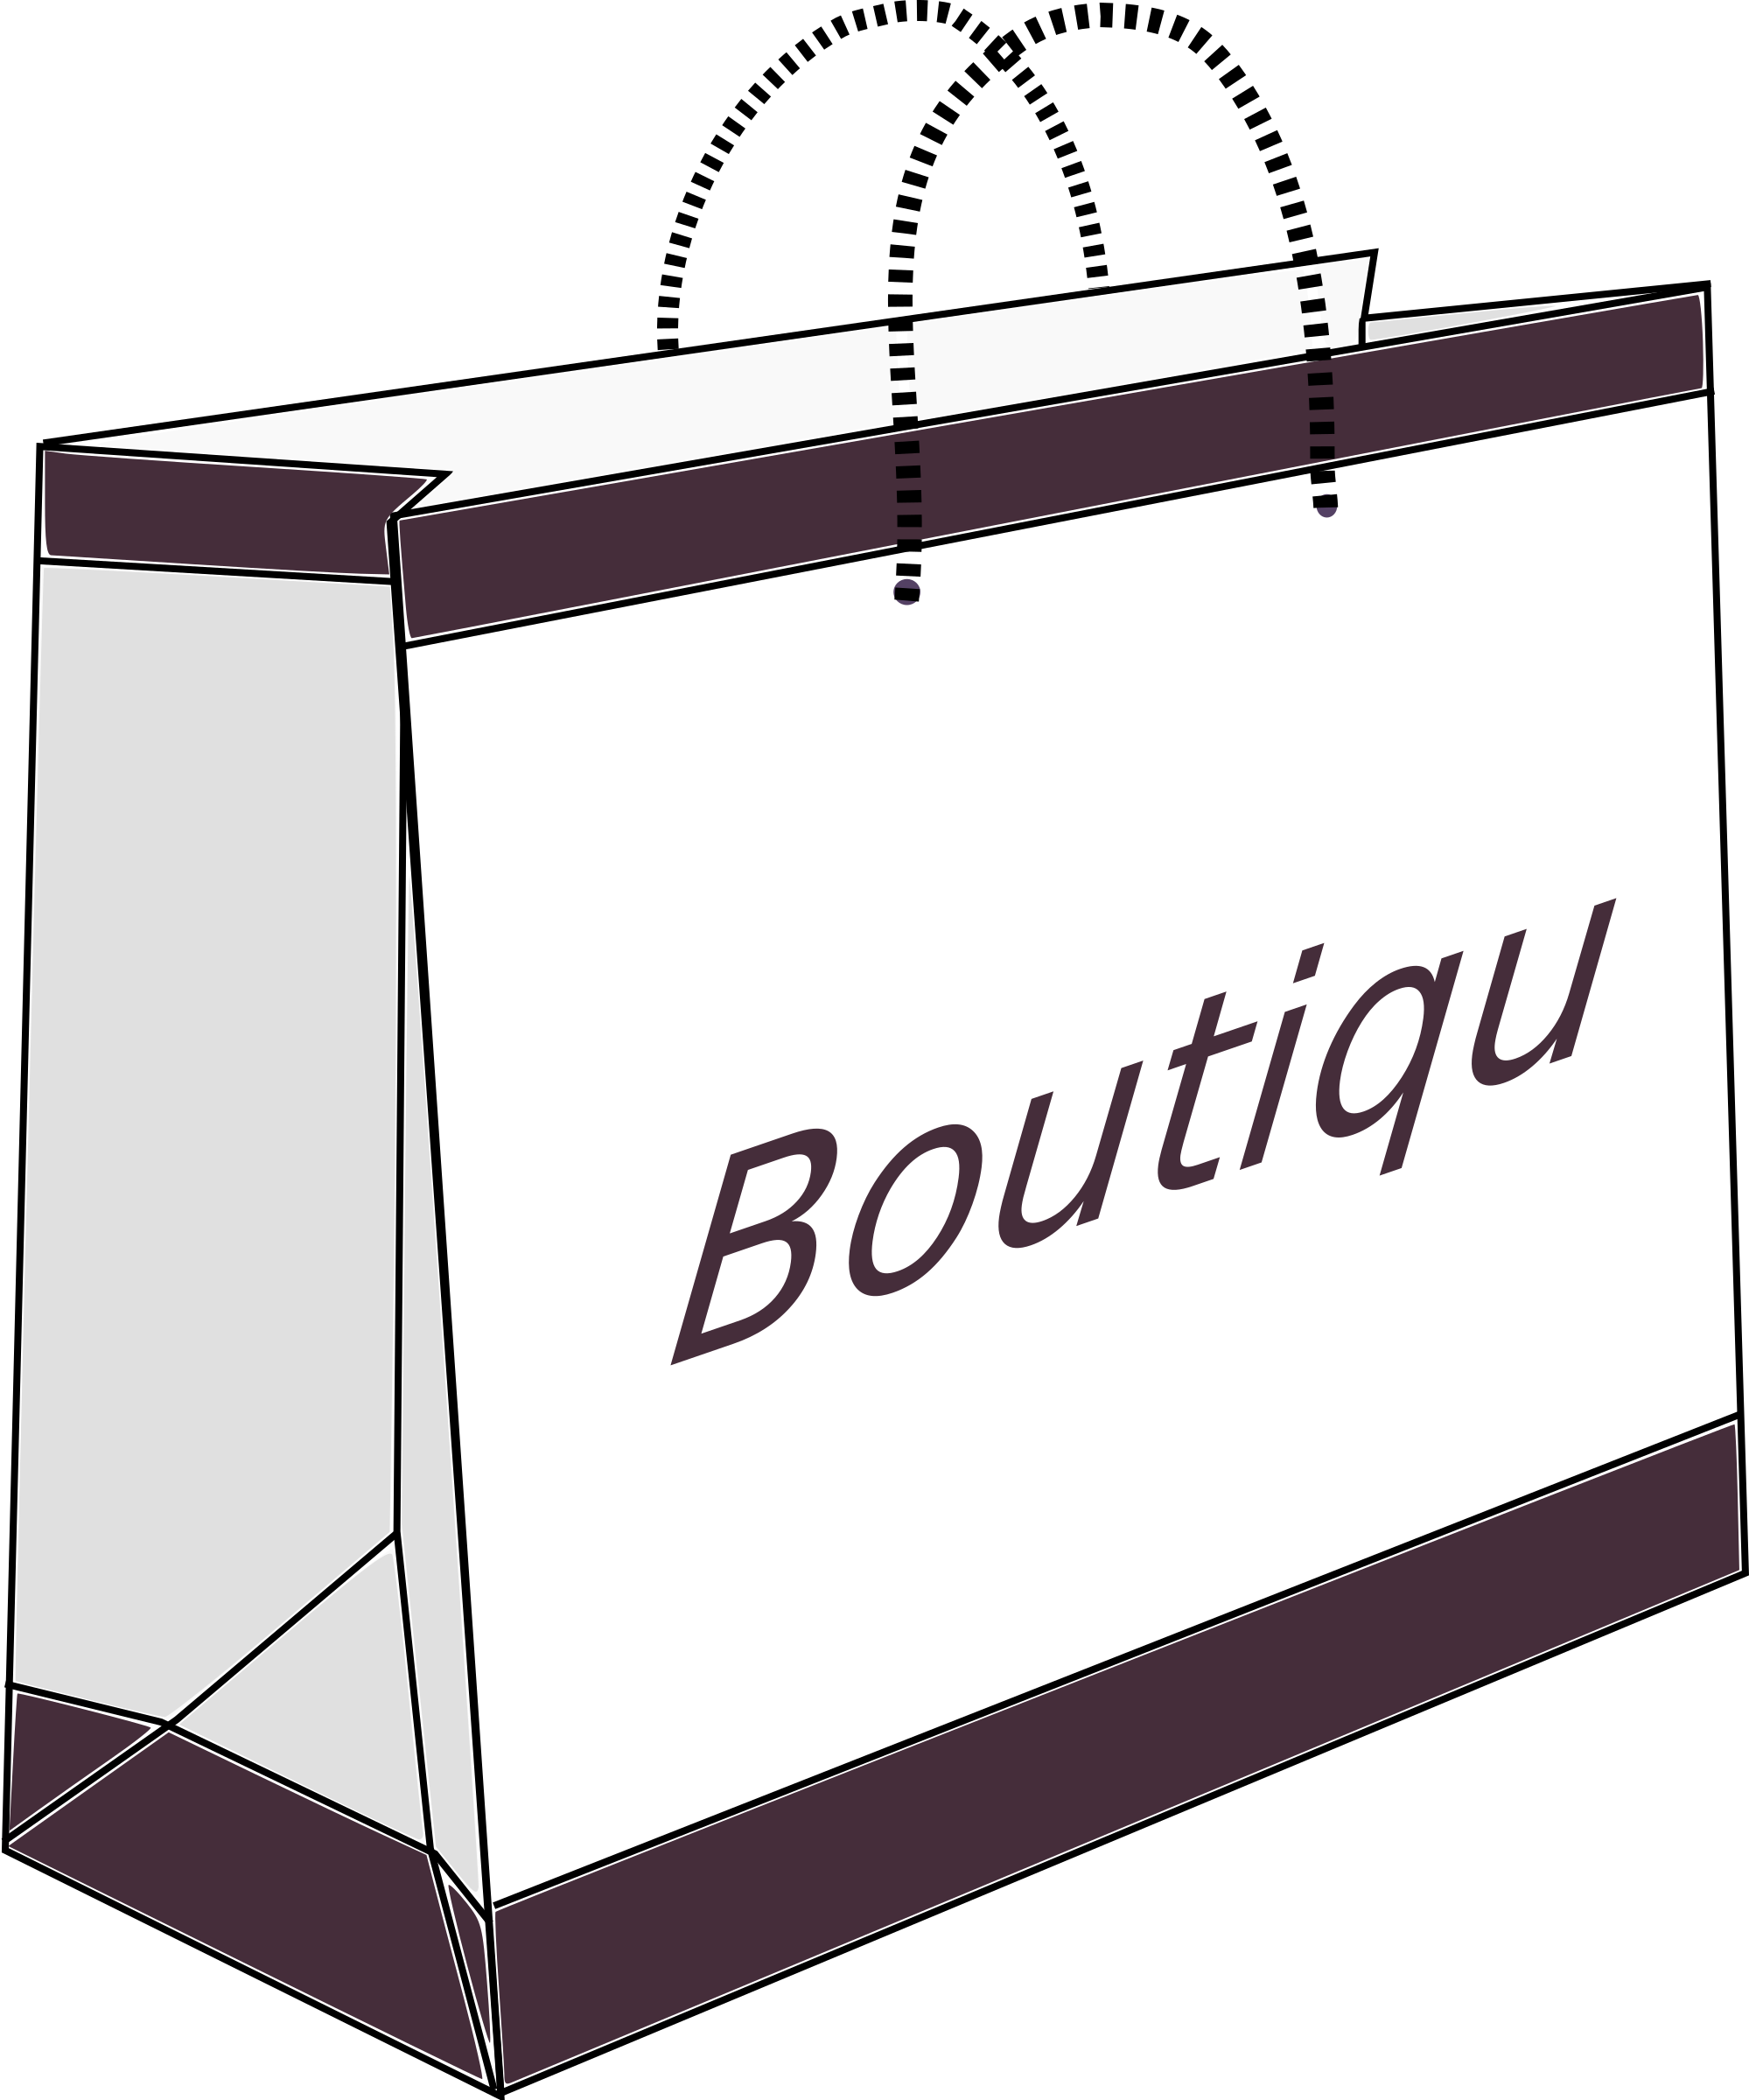 Boutique Shopping Bag - Shopping Bags Clipart Black And White (1999x2400)